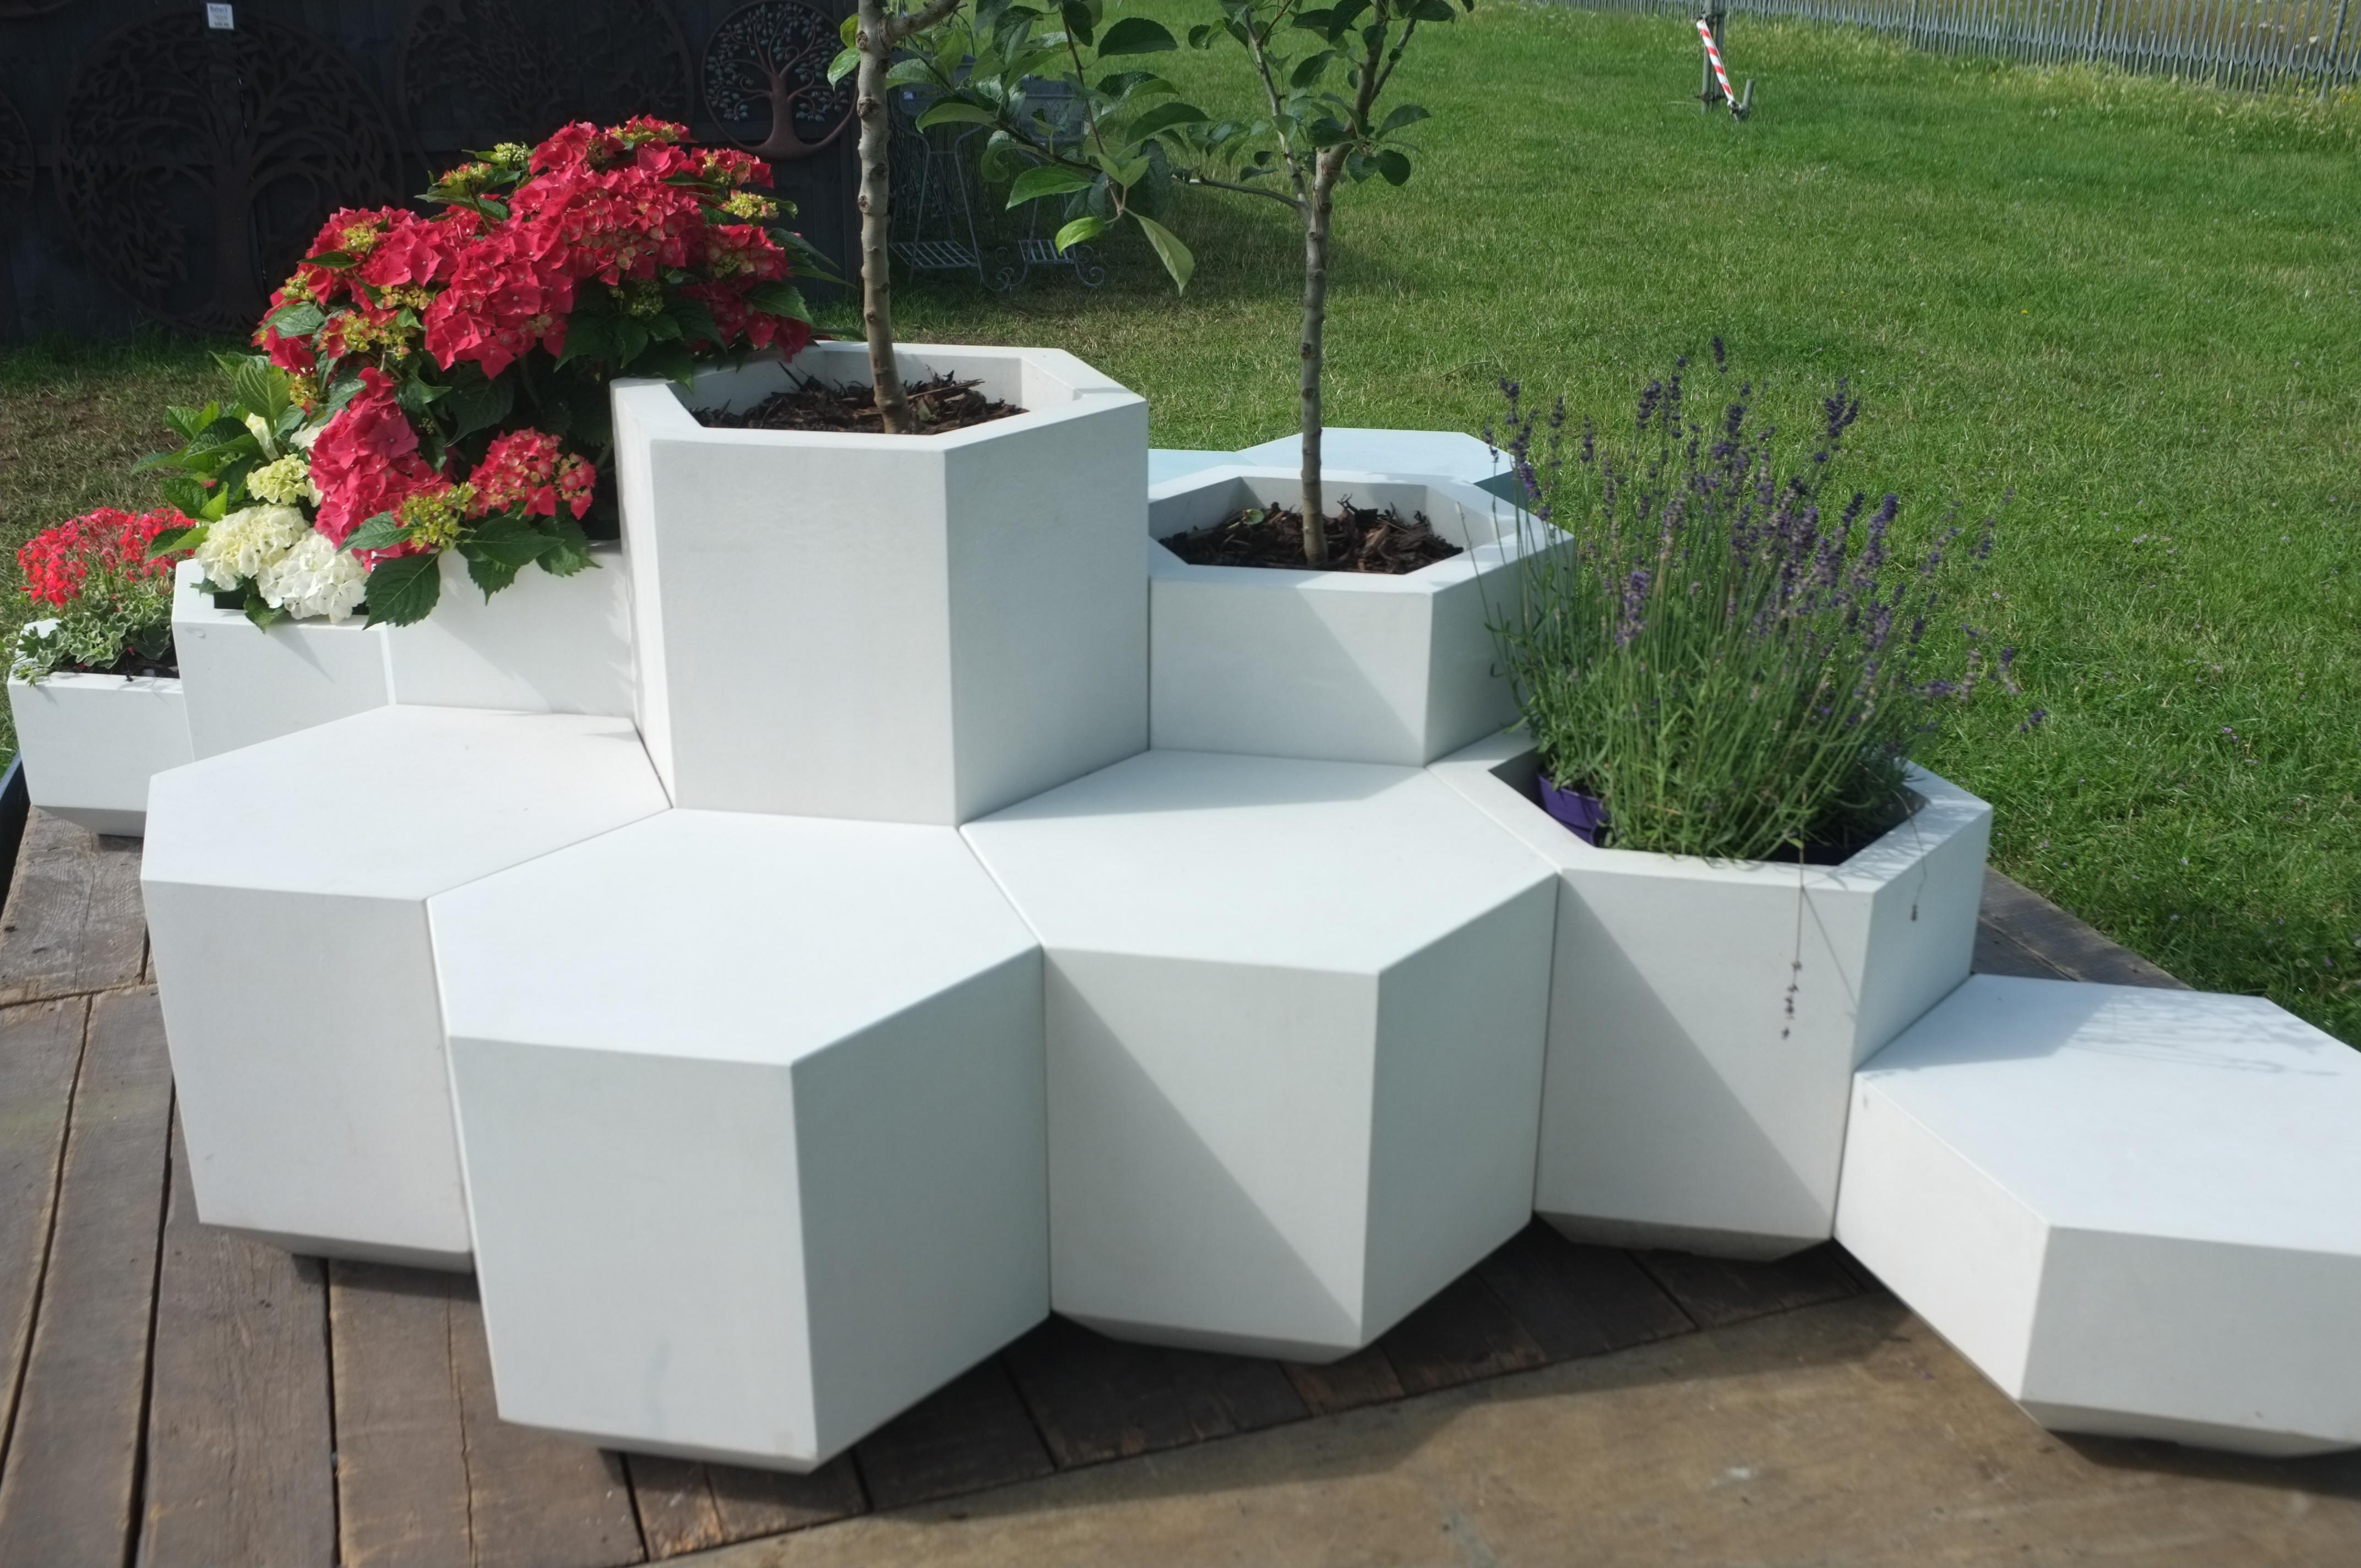 The Hex-block planter is a perfect hexagon. This simple geometric shape is handcrafted to survive outside in the harshest weather, but with its tactile smooth concrete finish it works just as well as an interior piece of furniture. Measures: 58